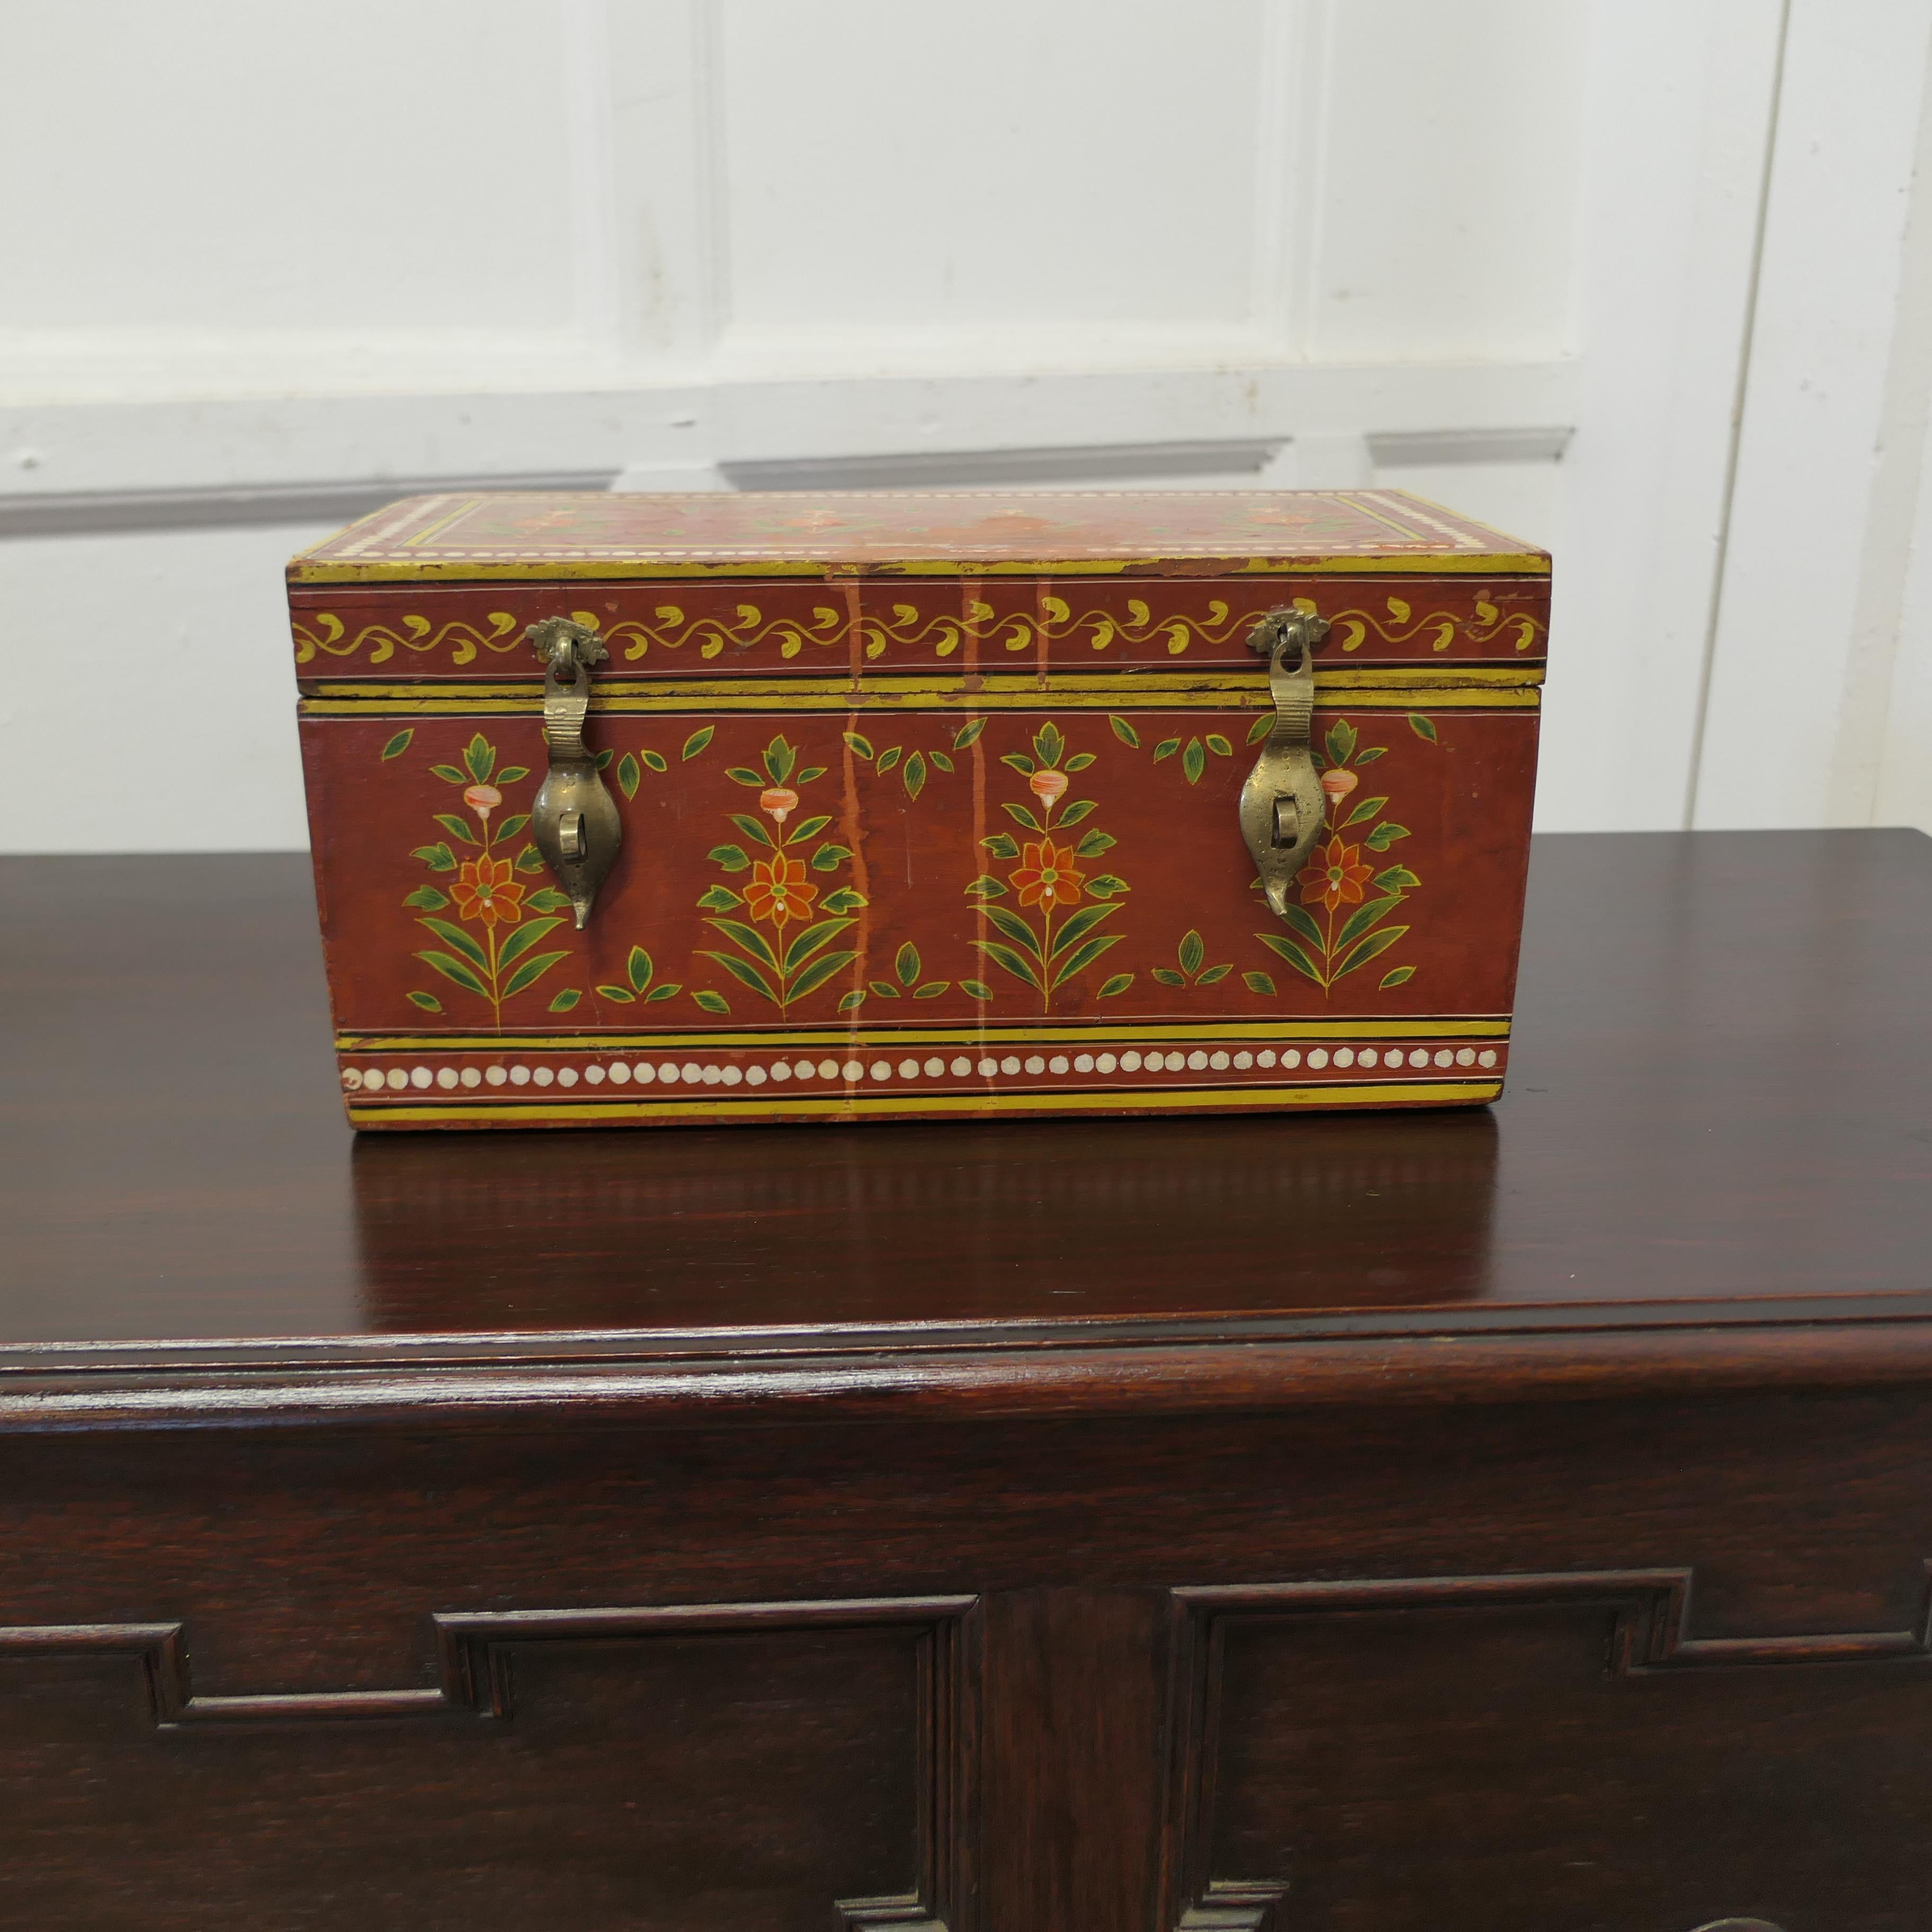 Indian Folk Art Painted Treasure Chest

This is a pretty piece, the chest is painted in the detailed Indian Folk Art Style in warm red colours showing stylised leaves and flowers
The painted decoration is very attractive and it has a little wear on